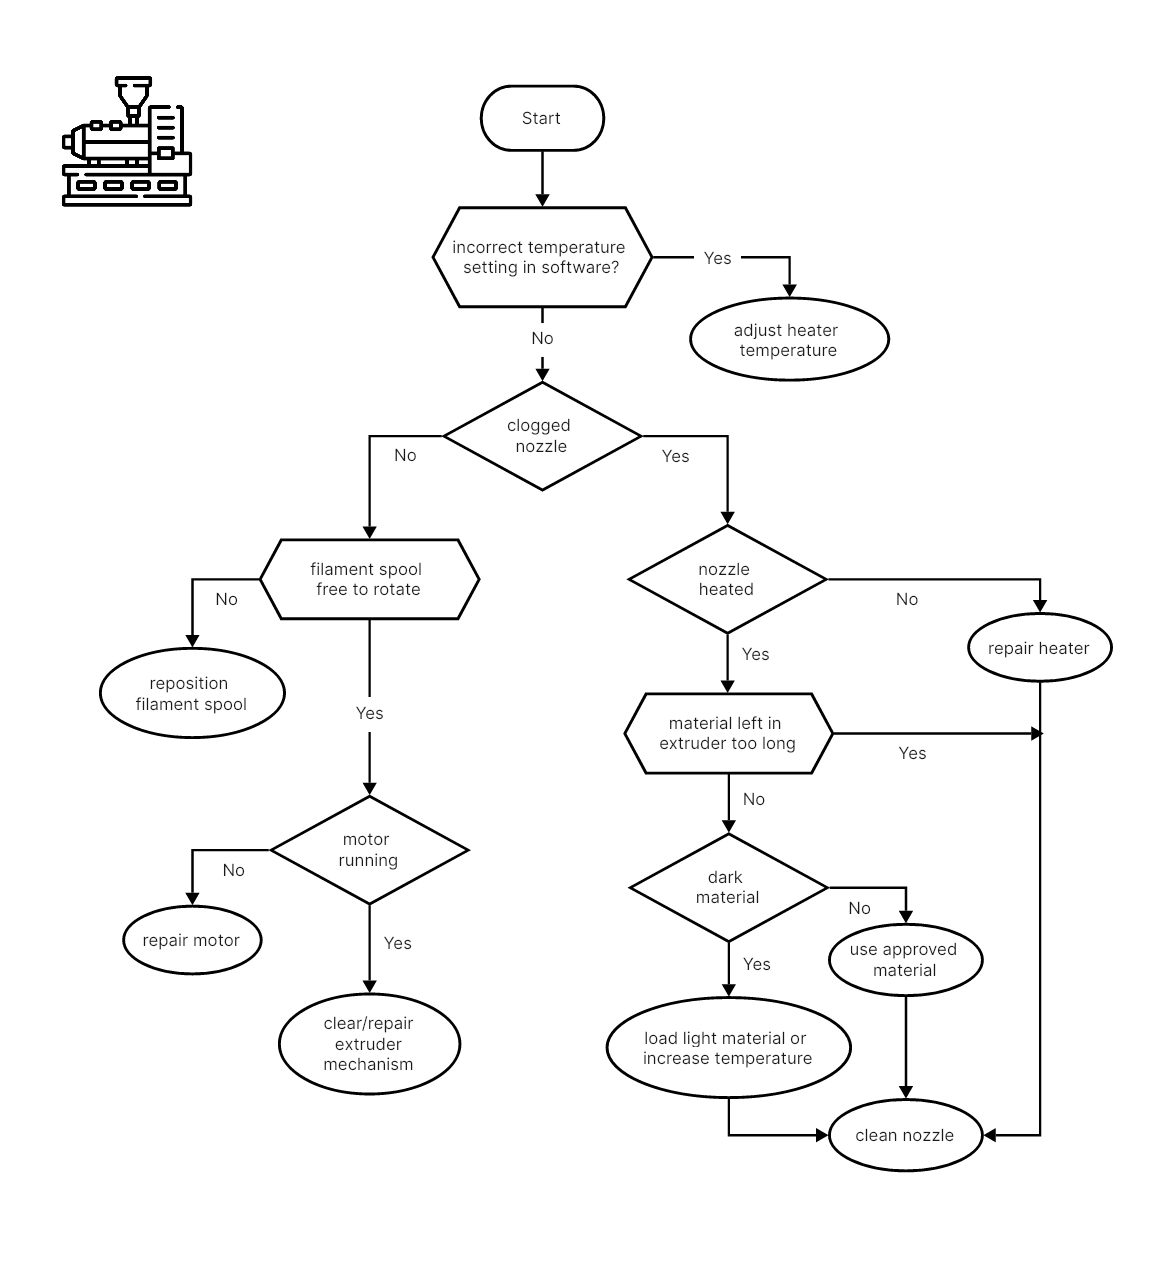 20. Troubleshooting Flowchart for Extruder Malfunctions